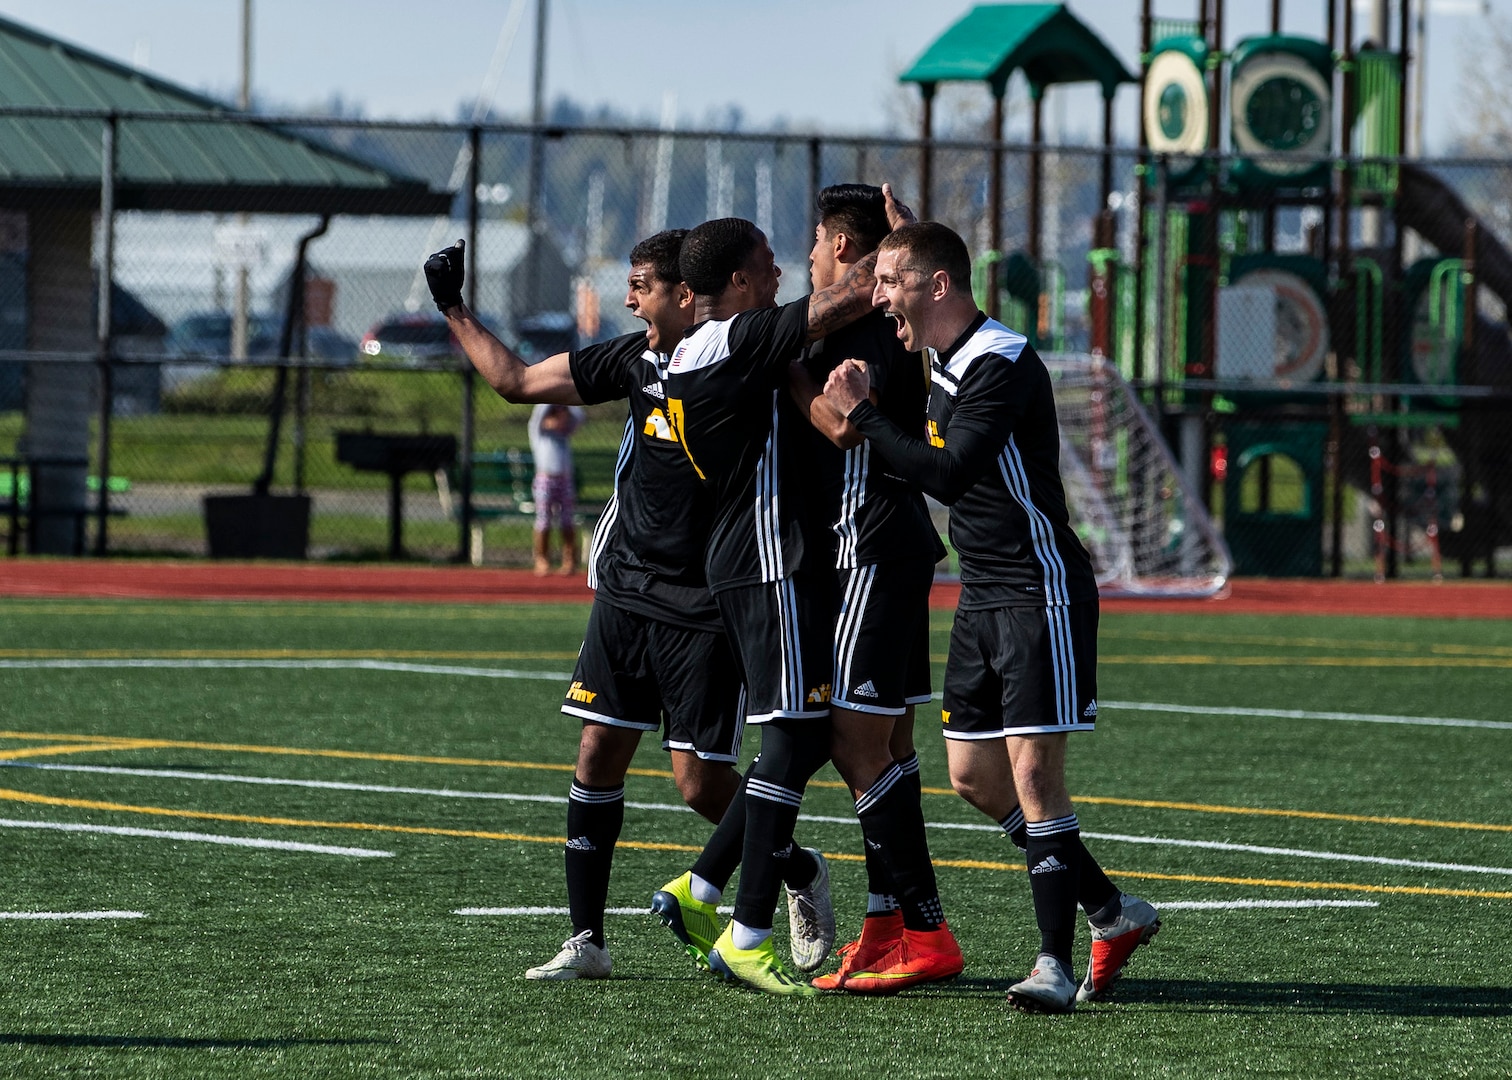 NAVAL STATION EVERETT, Wash.  (April 20, 2019) Army scores their final goal in the last possible moments of the match to win the 2019 Armed Forces Men's Soccer Championship held at Naval Station Everett, Wash. from 14-20 April, featuring Service members from the Army, Marine Corps, Navy (including Coast Guard) and Air Force. (U.S. Navy photo by MC2 Ian Carver/Released)